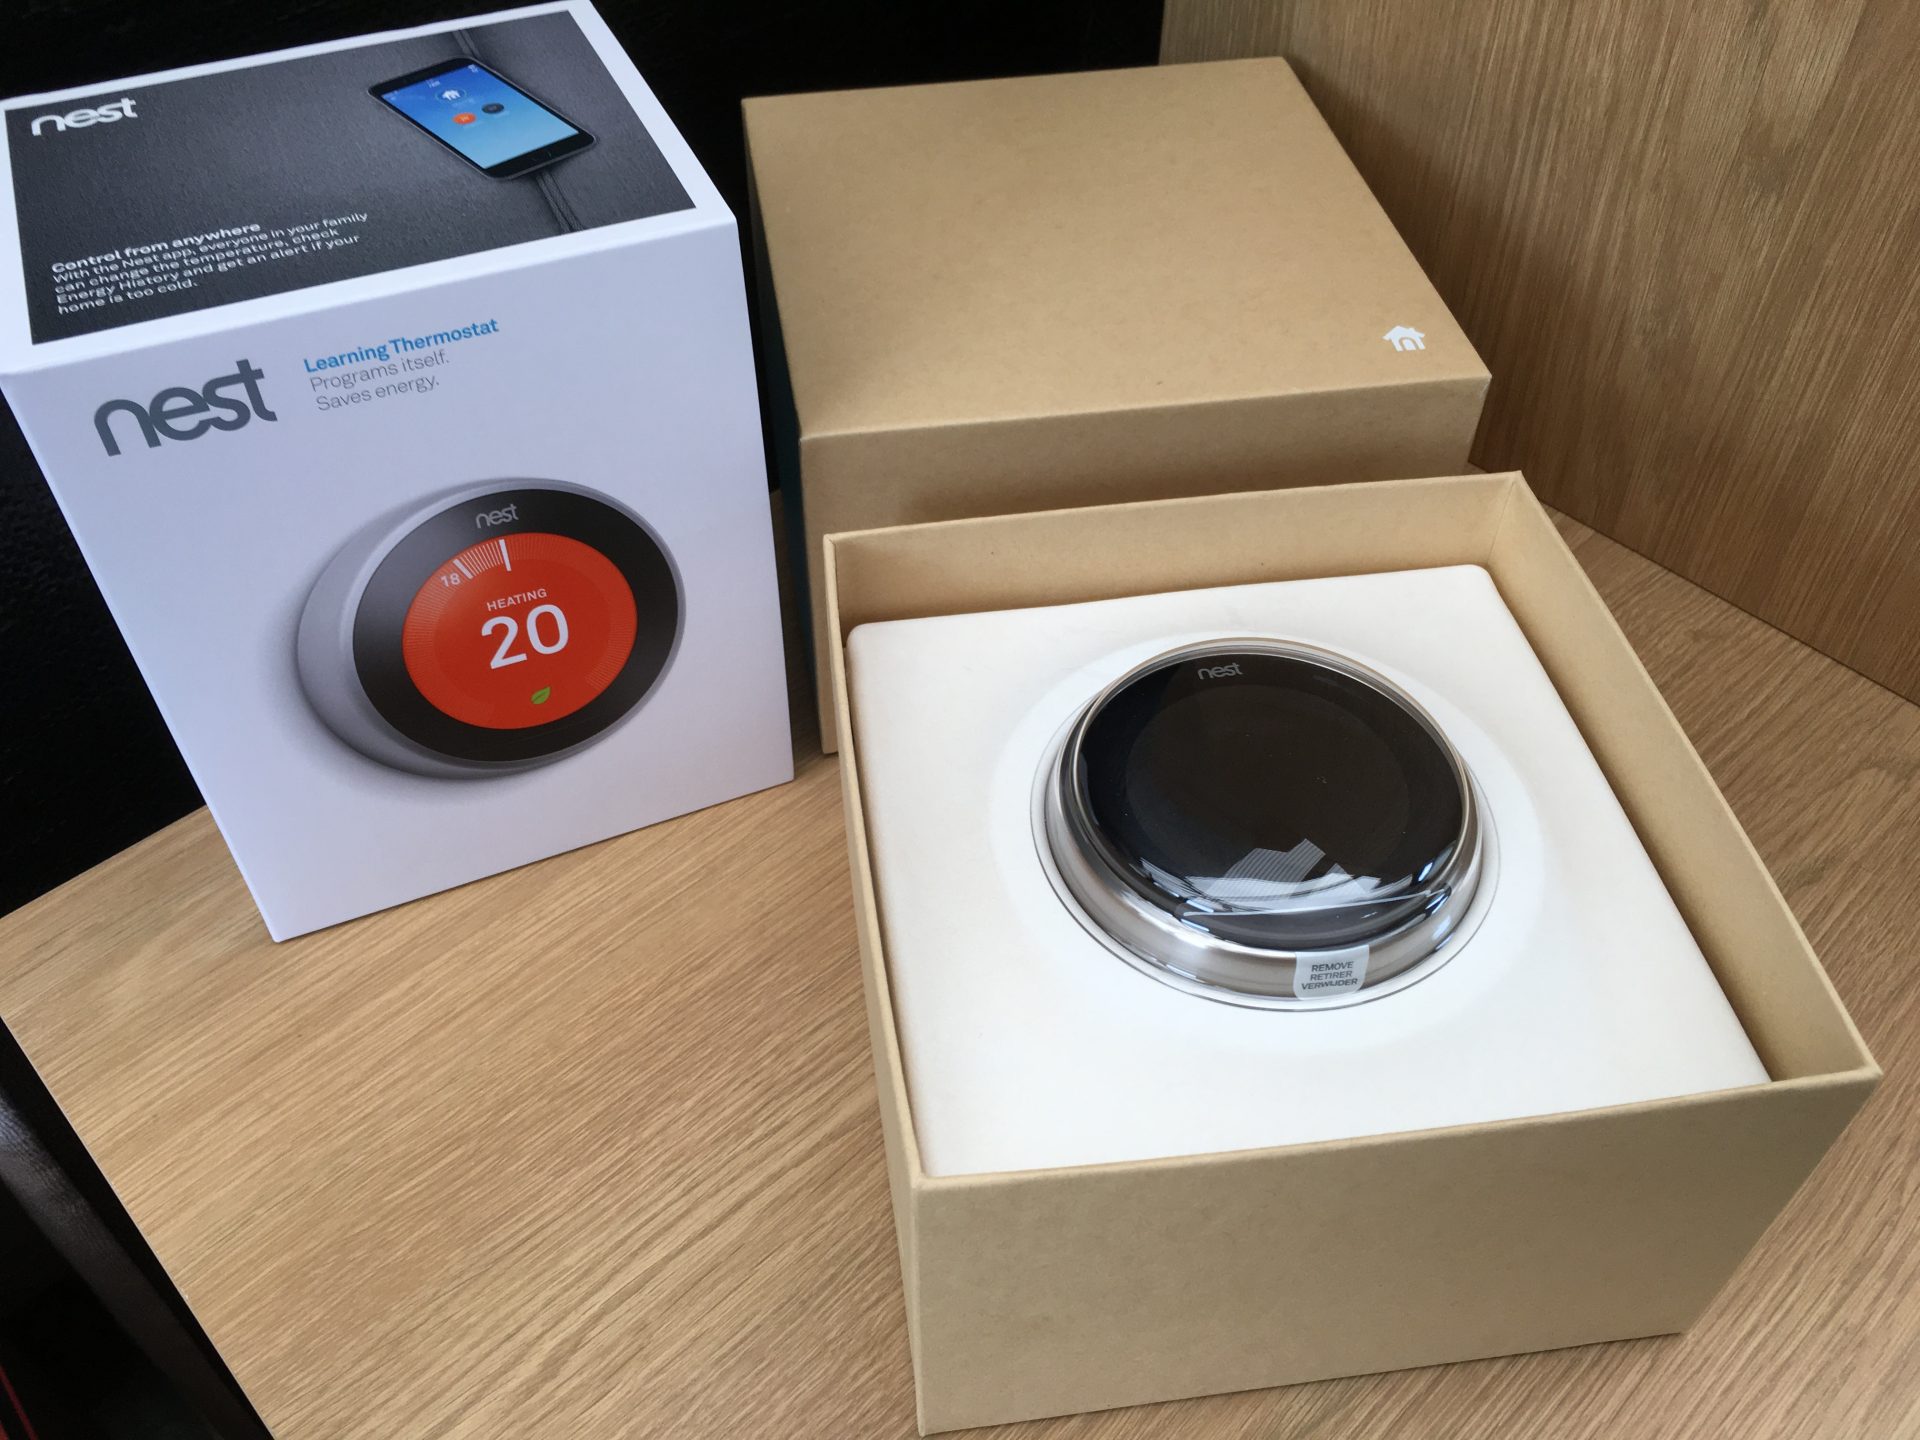 3rd-gen Nest Learning Thermostat